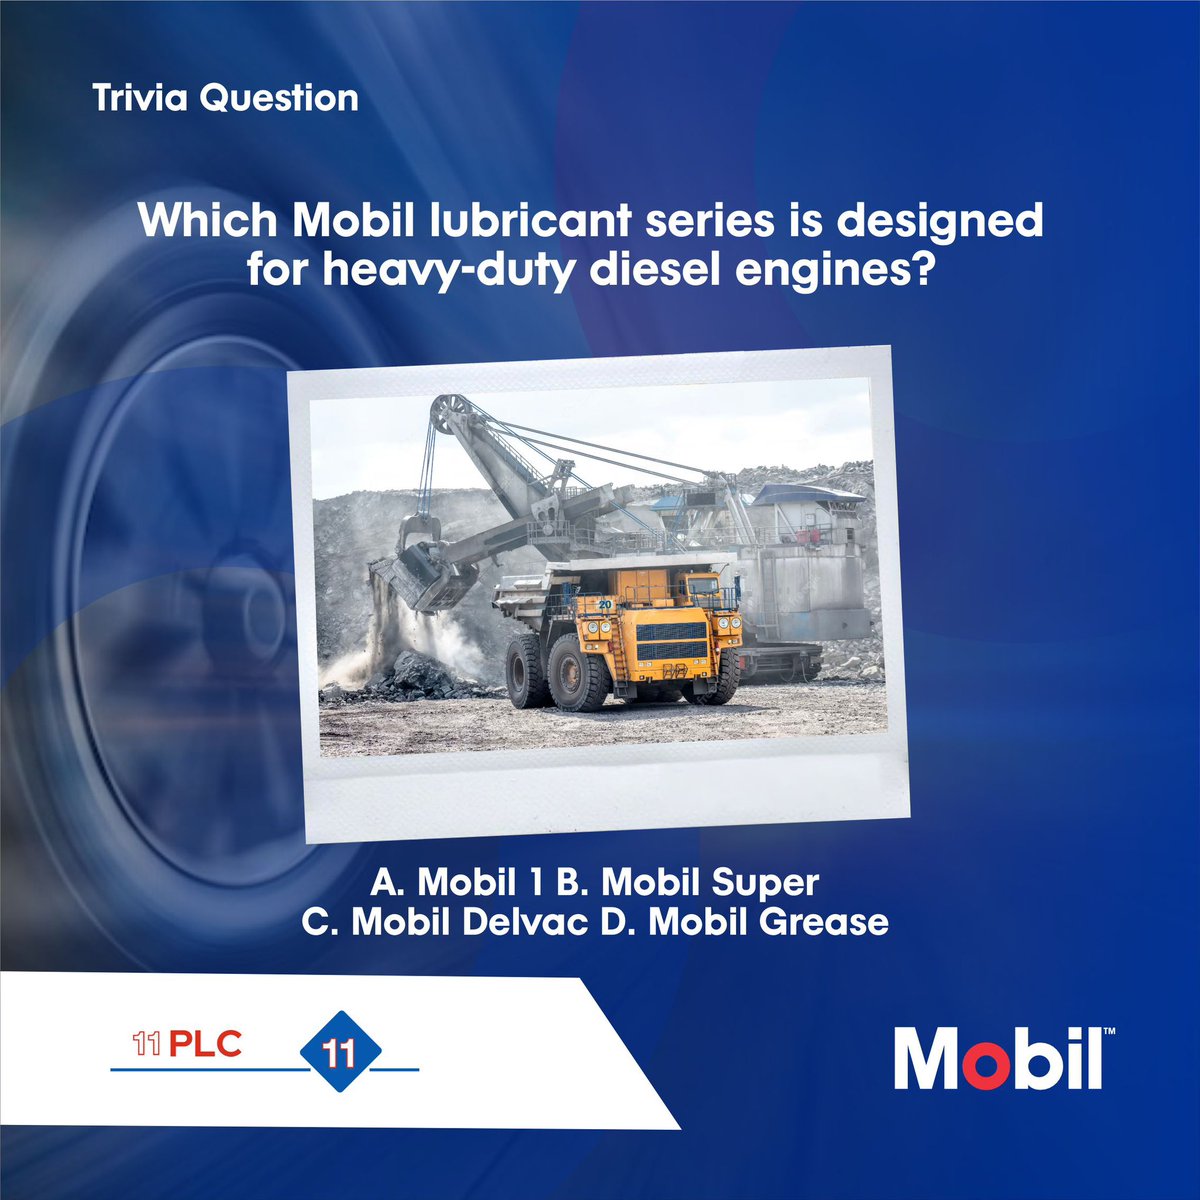 Test your knowledge!

Which Mobil lubricant series is designed for heavy-duty diesel engines?

A. Mobil 1
B. Mobil Super
C. Mobil Delvac
D. Mobil Grease

Let us know your answer in the comments below 

#MobilDelvac #HeavyDutyDiesel #DieselEngineOil #MobilLubricants